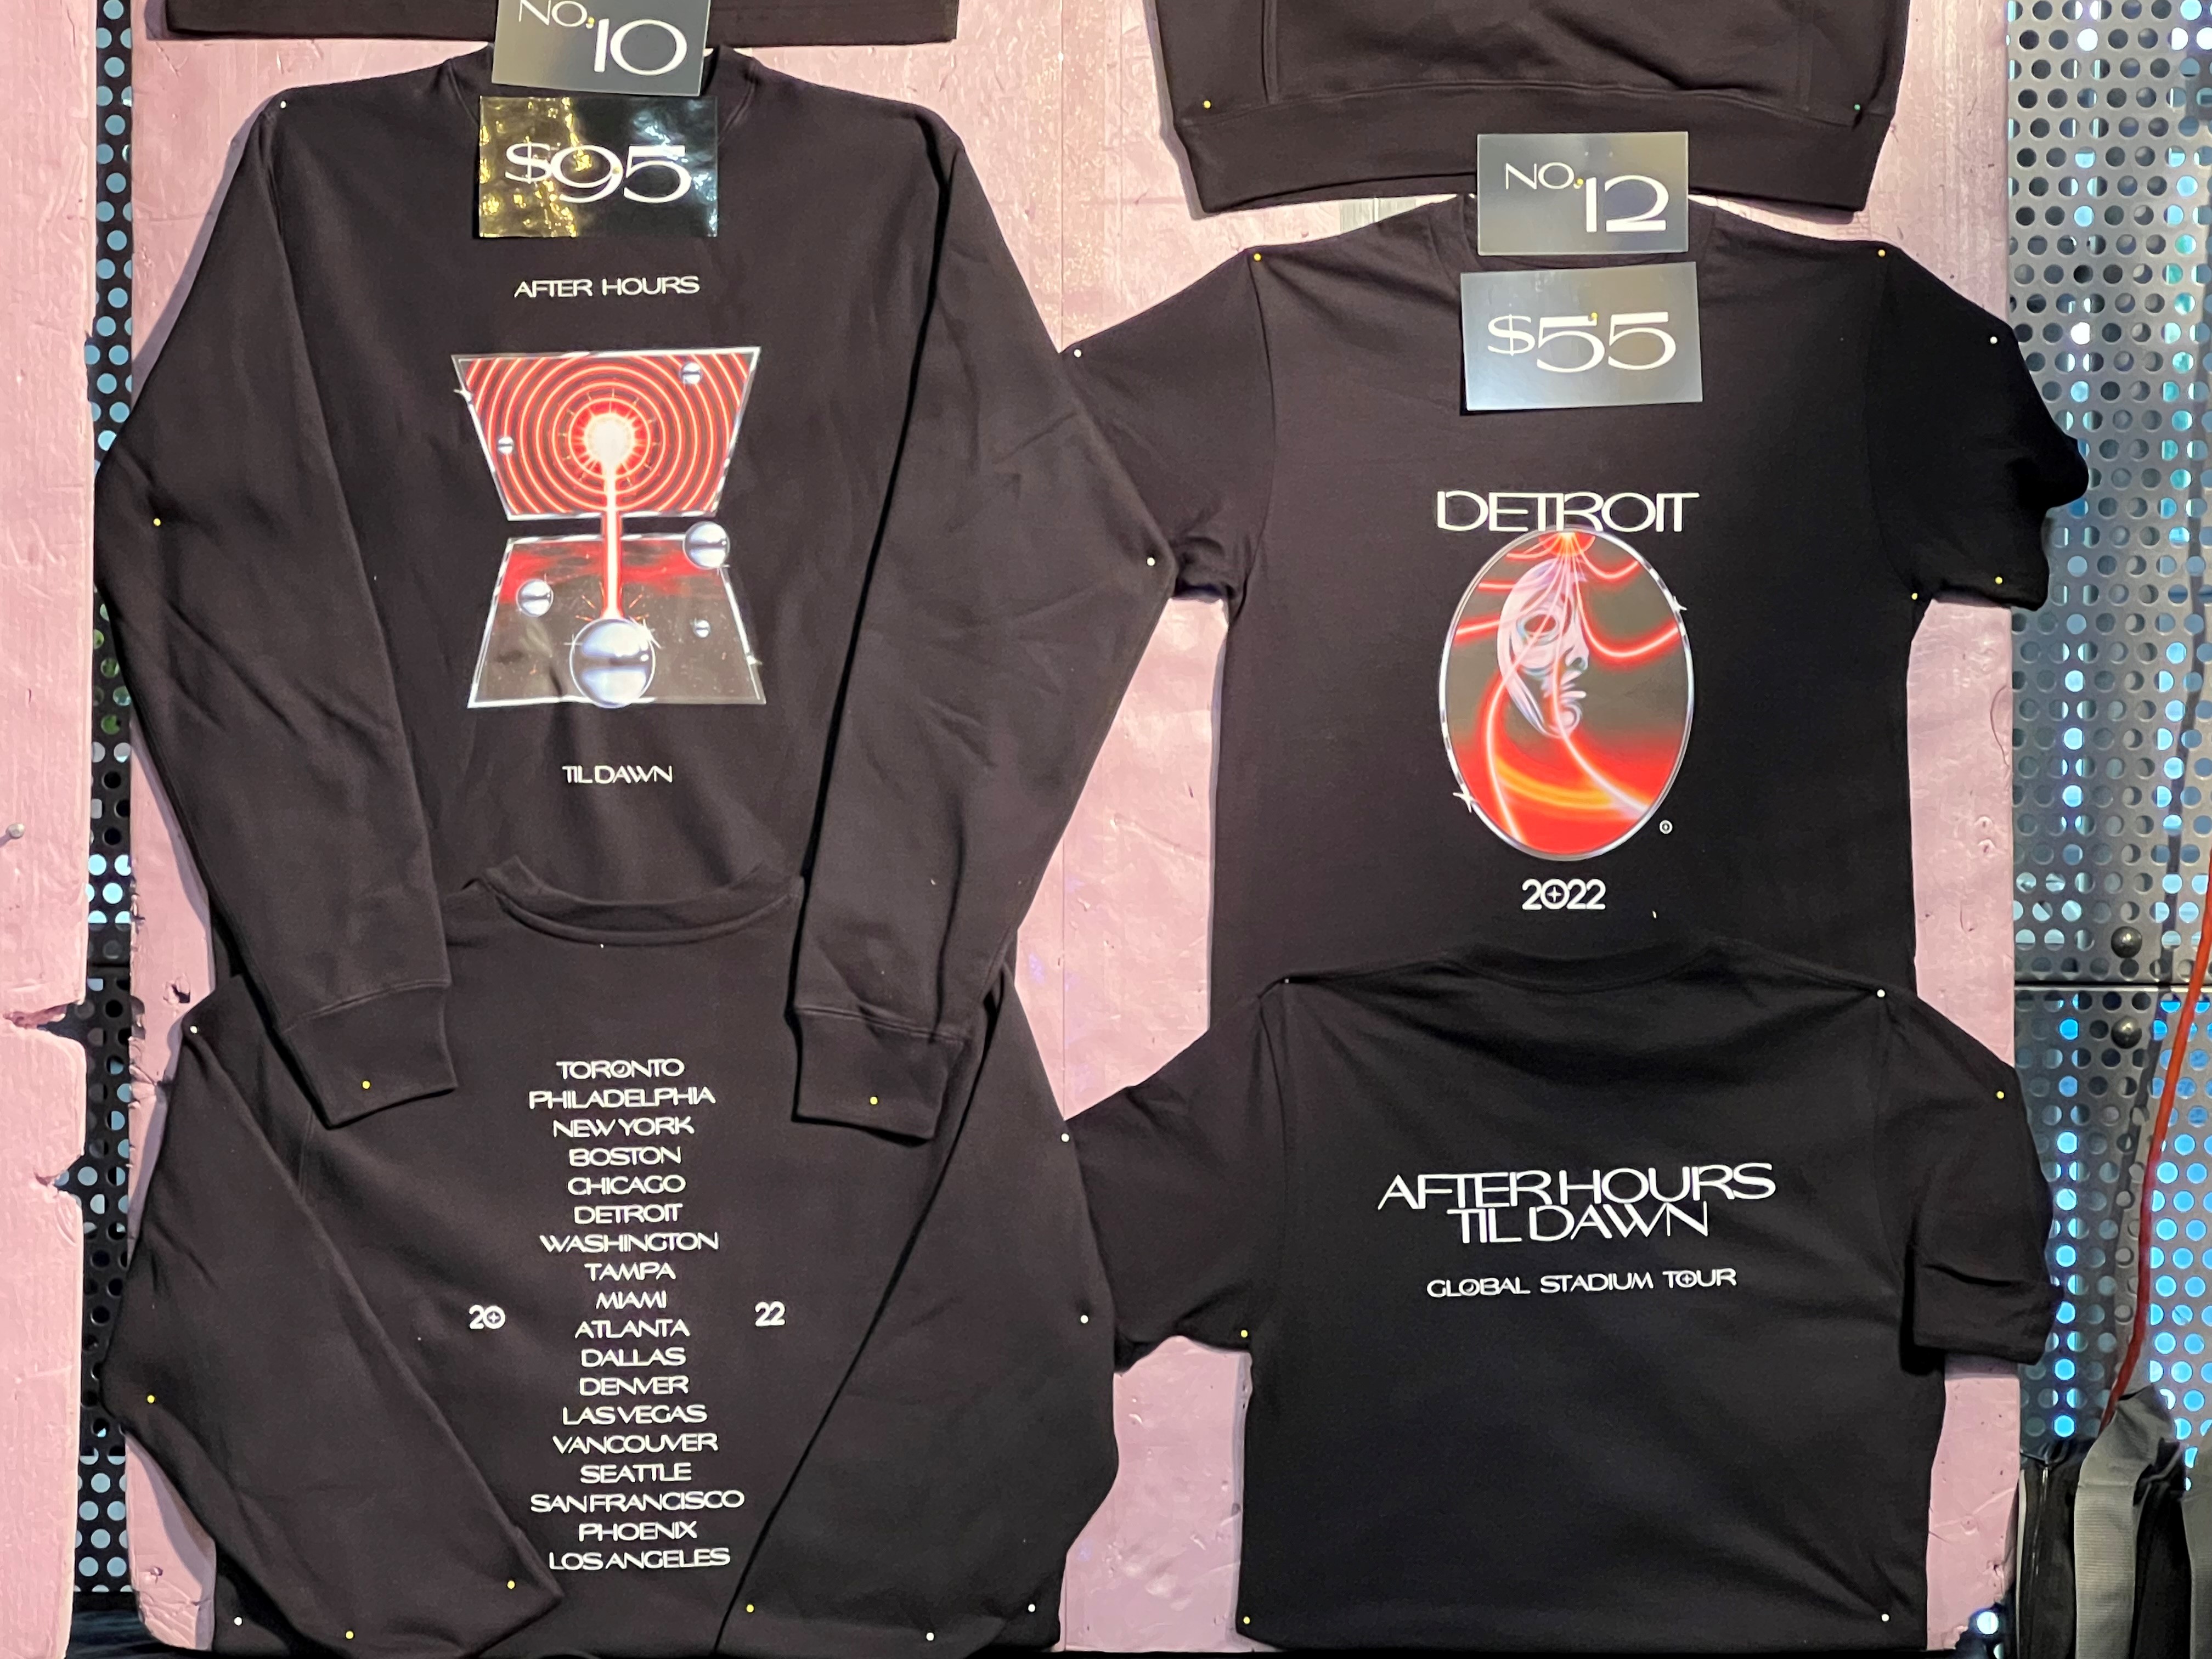 the after hours tour merch